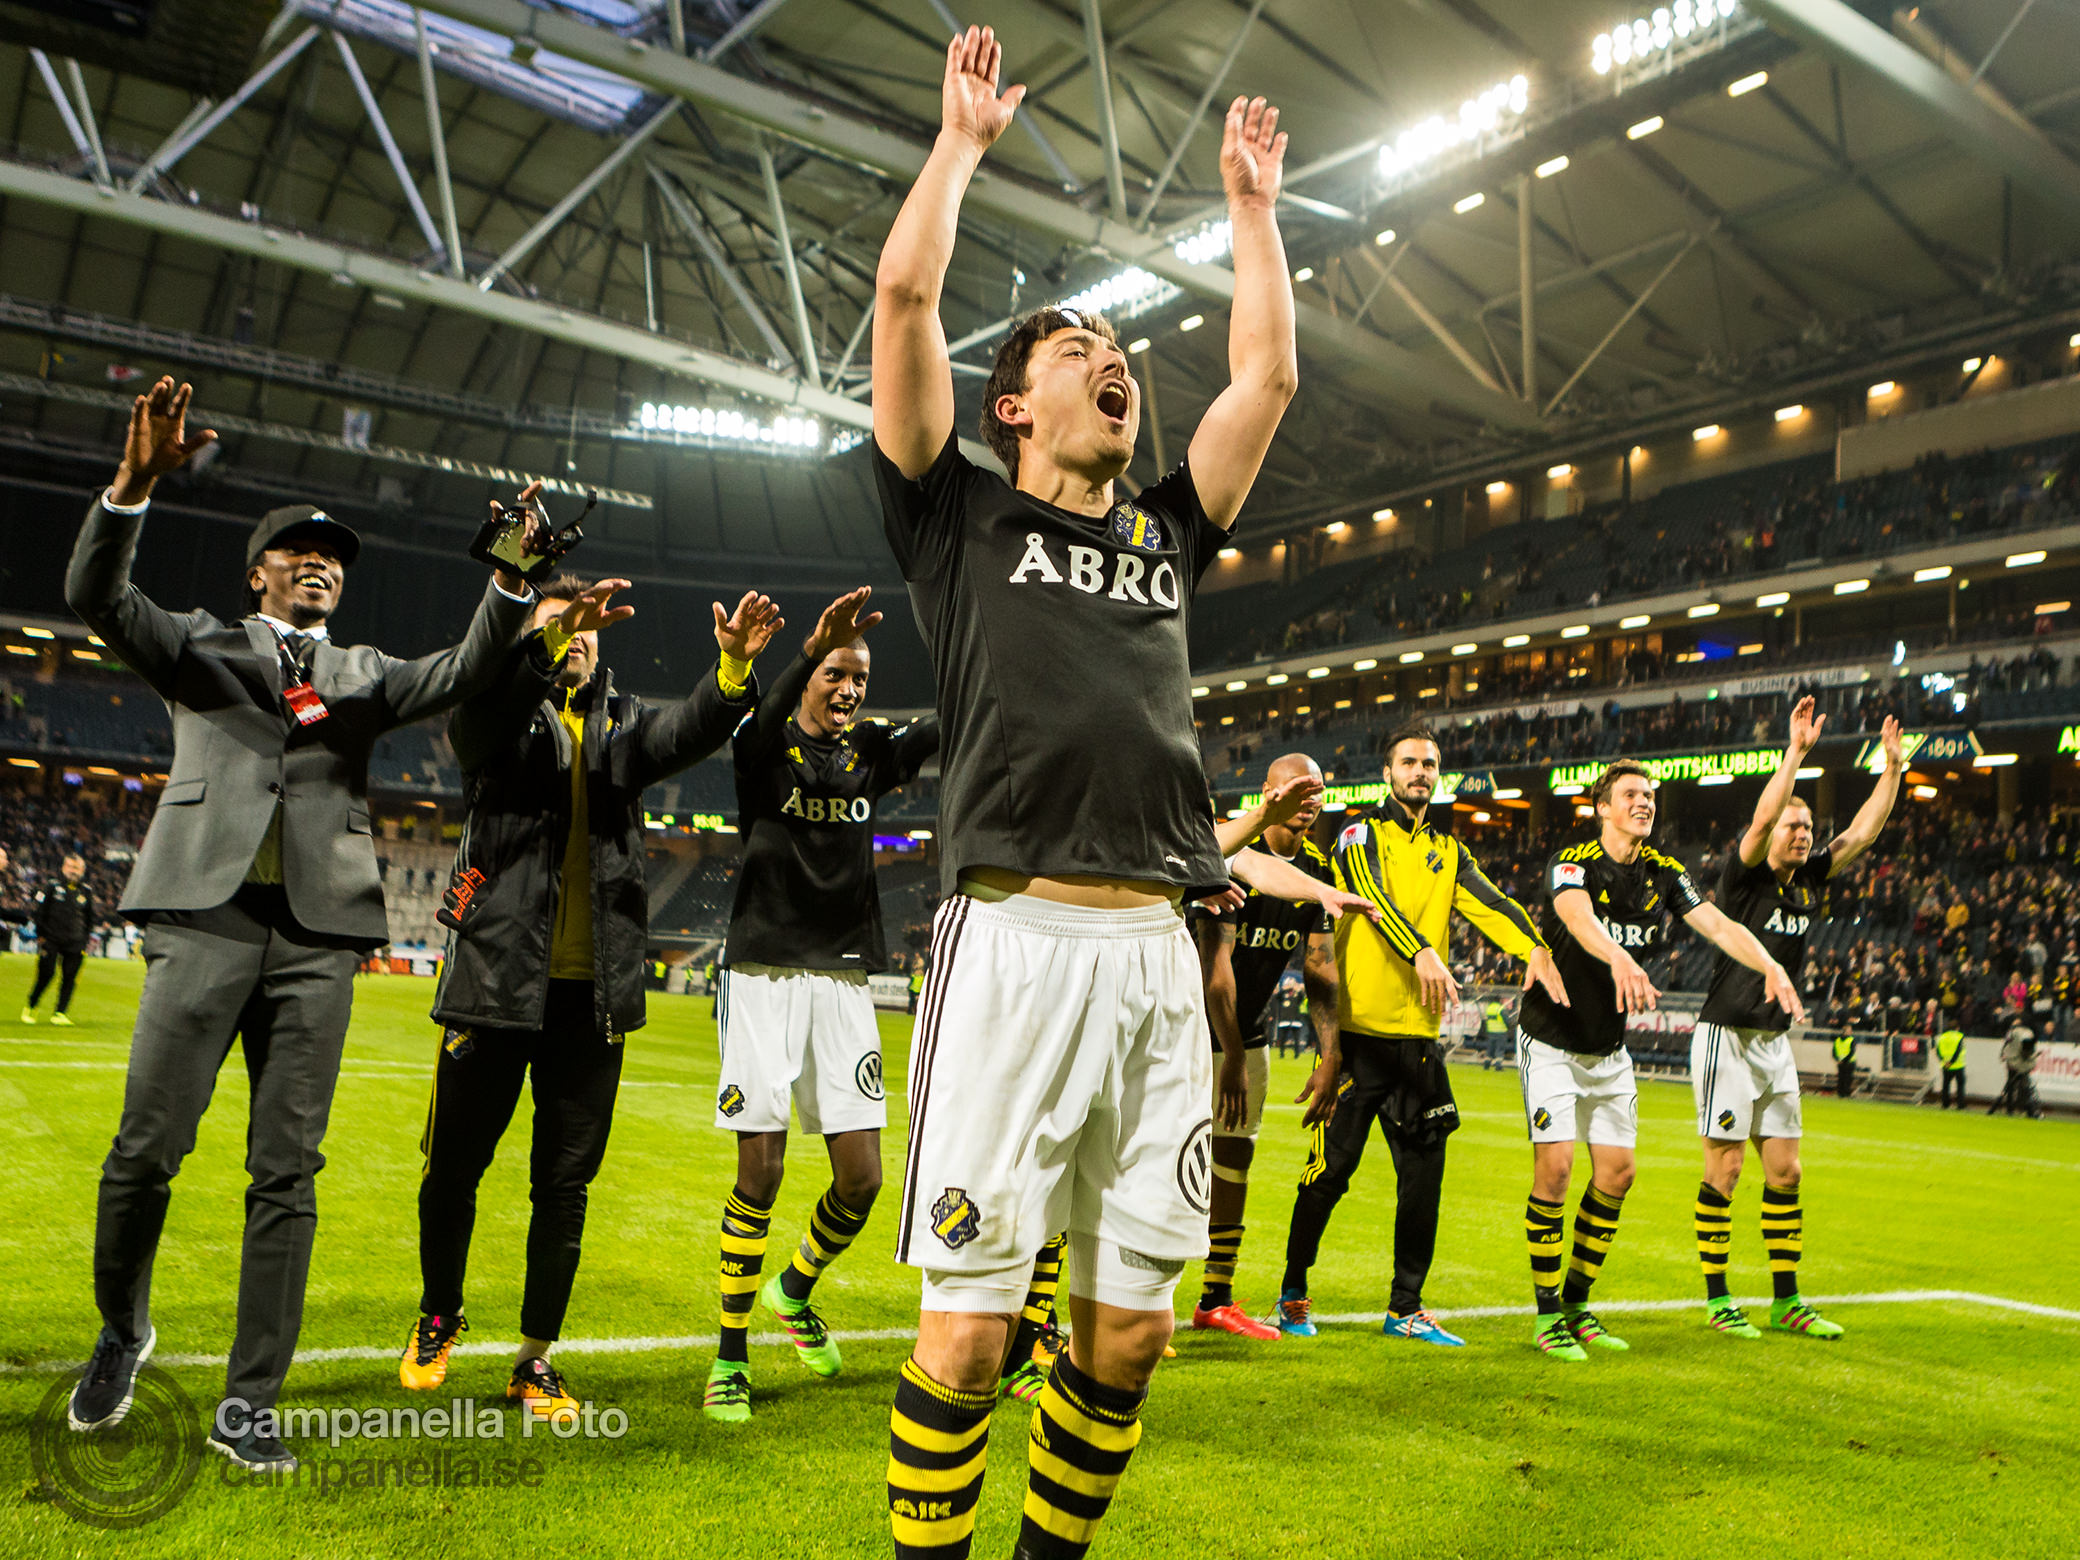 AIK crushes Djurgården and claims the derby - Michael Campanella Photography